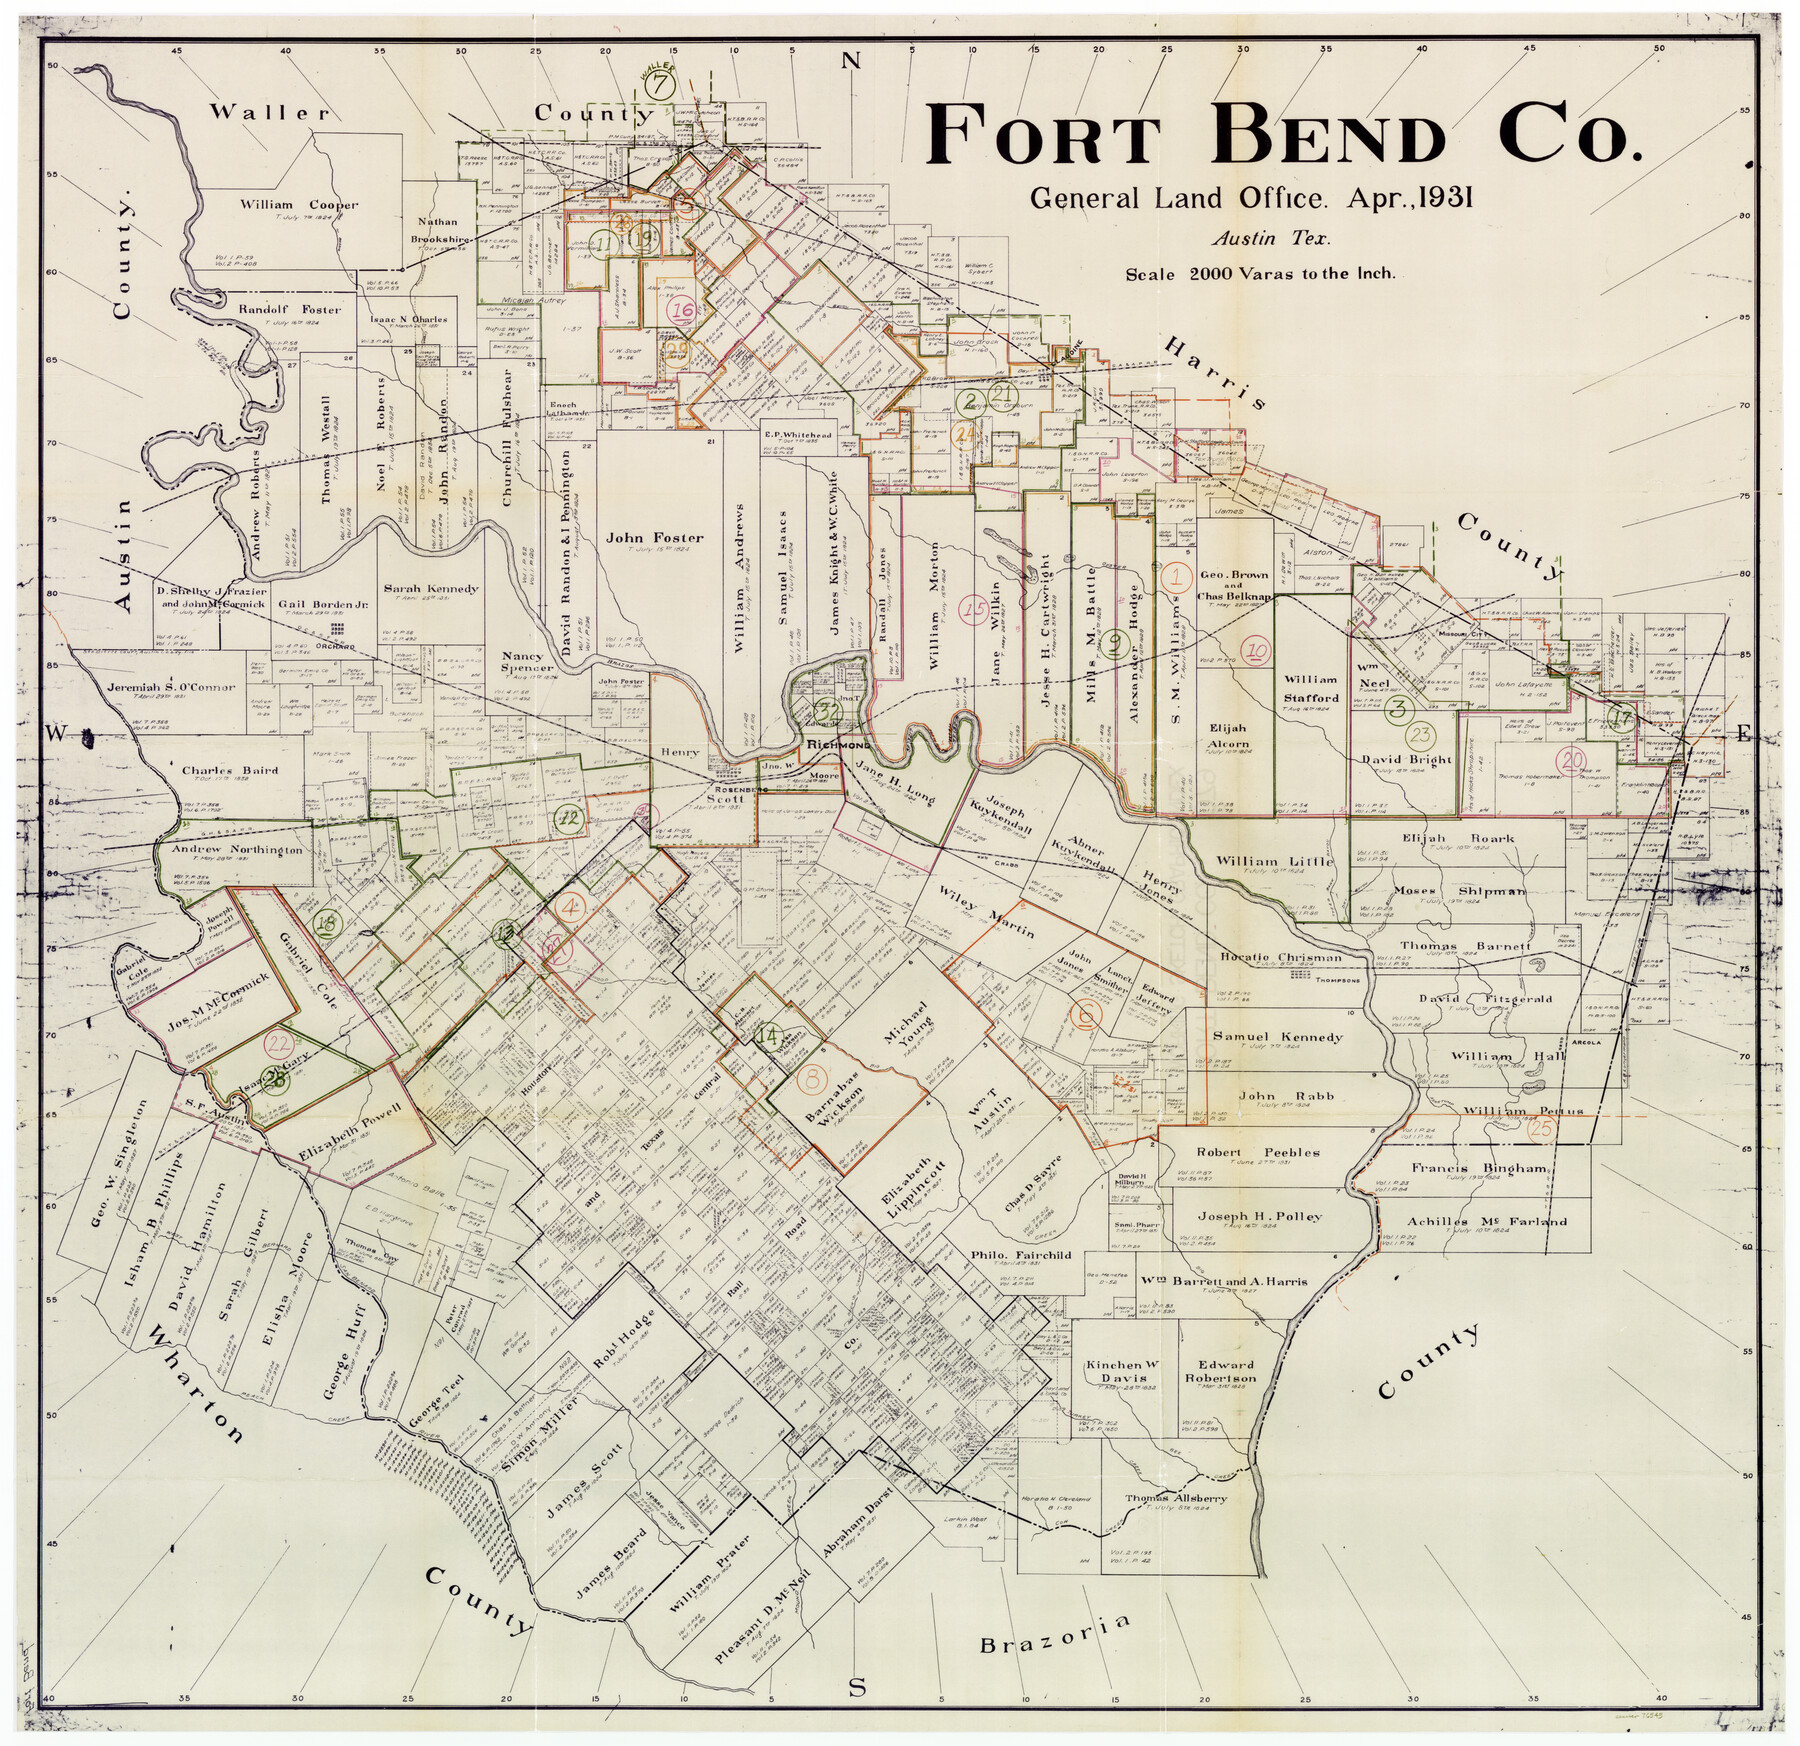 76545, Fort Bend County Working Sketch Graphic Index, General Map Collection